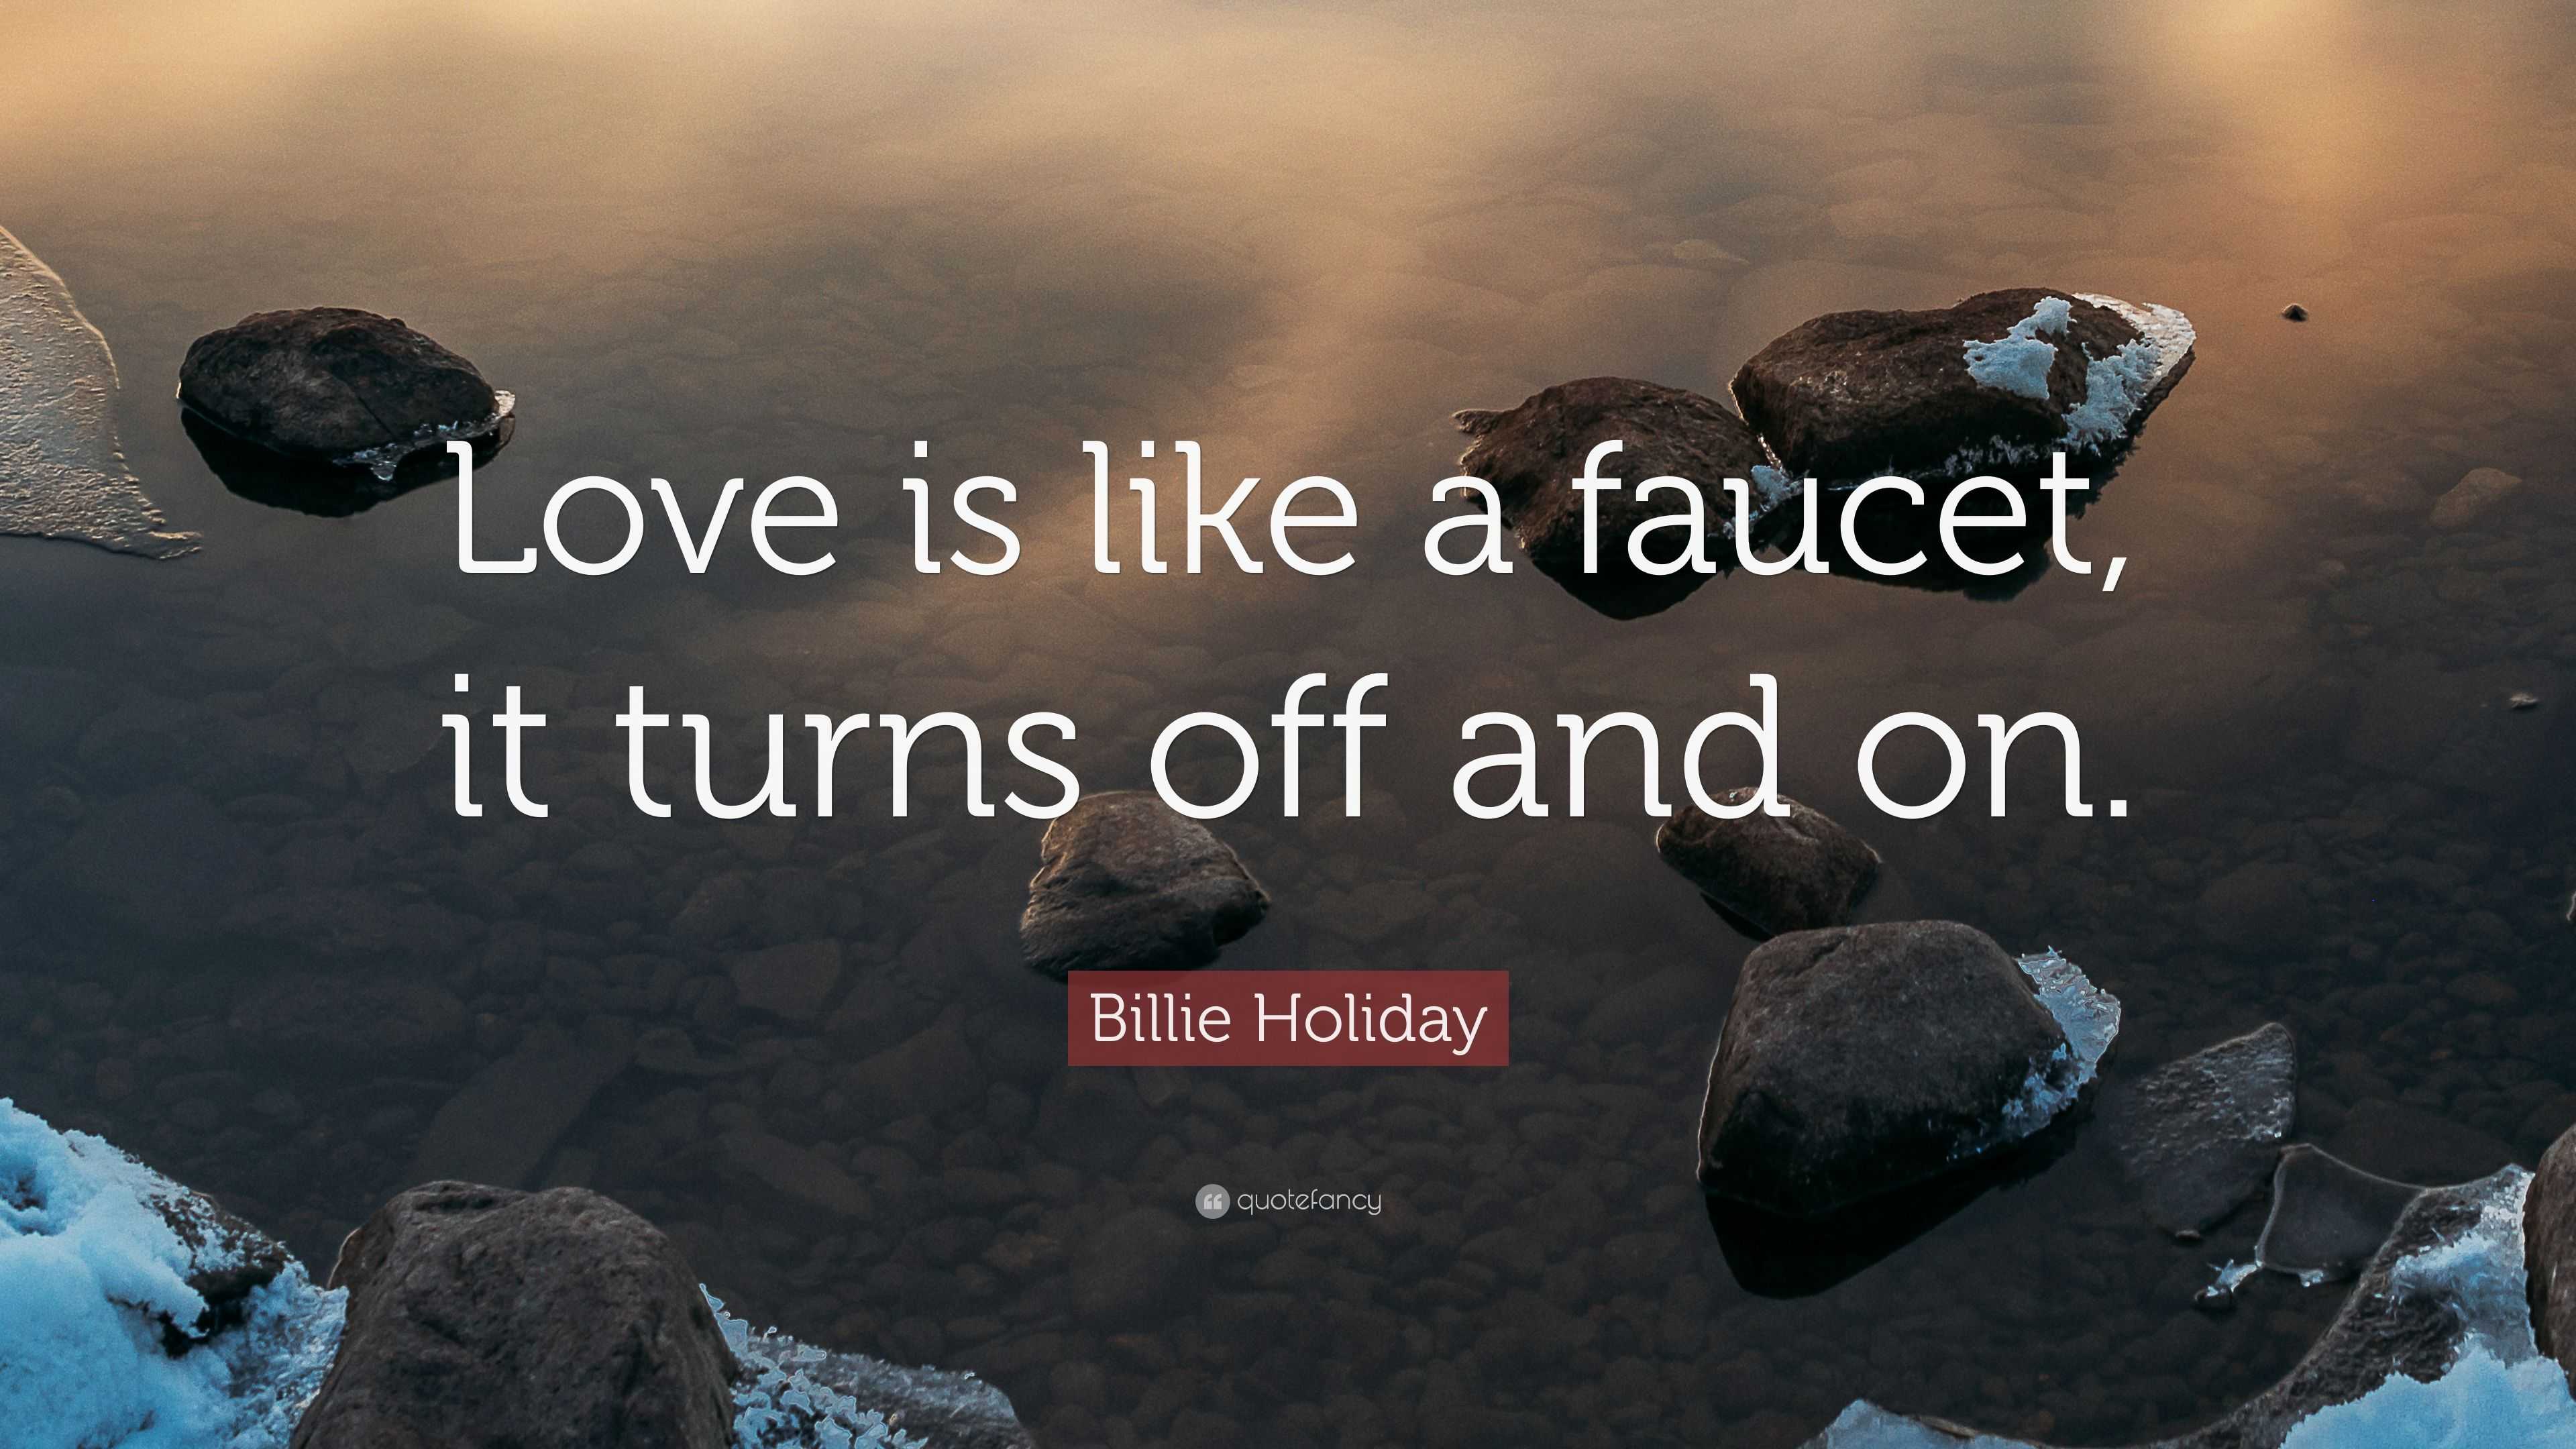 Billie Holiday Quote “Love is like a faucet it turns off and on